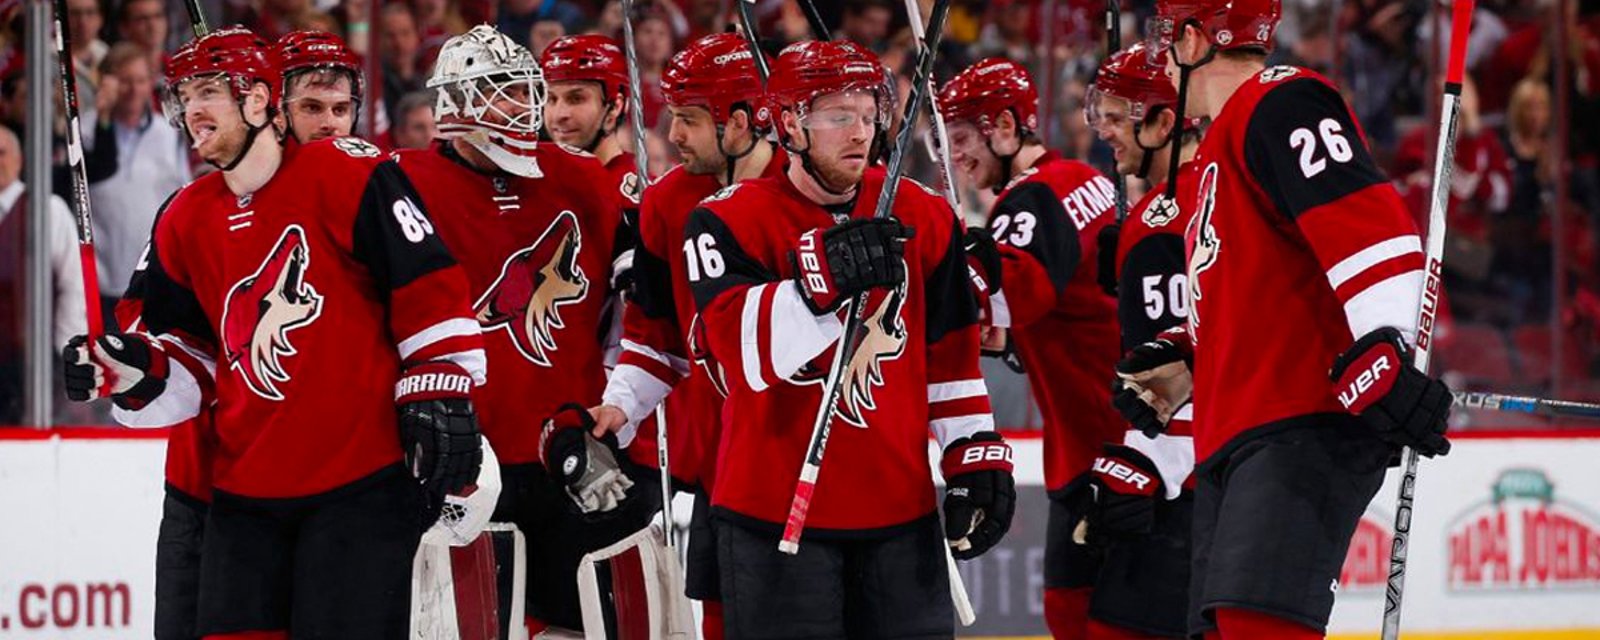 Report: Coyotes sold to NFL owner, relocation coming?